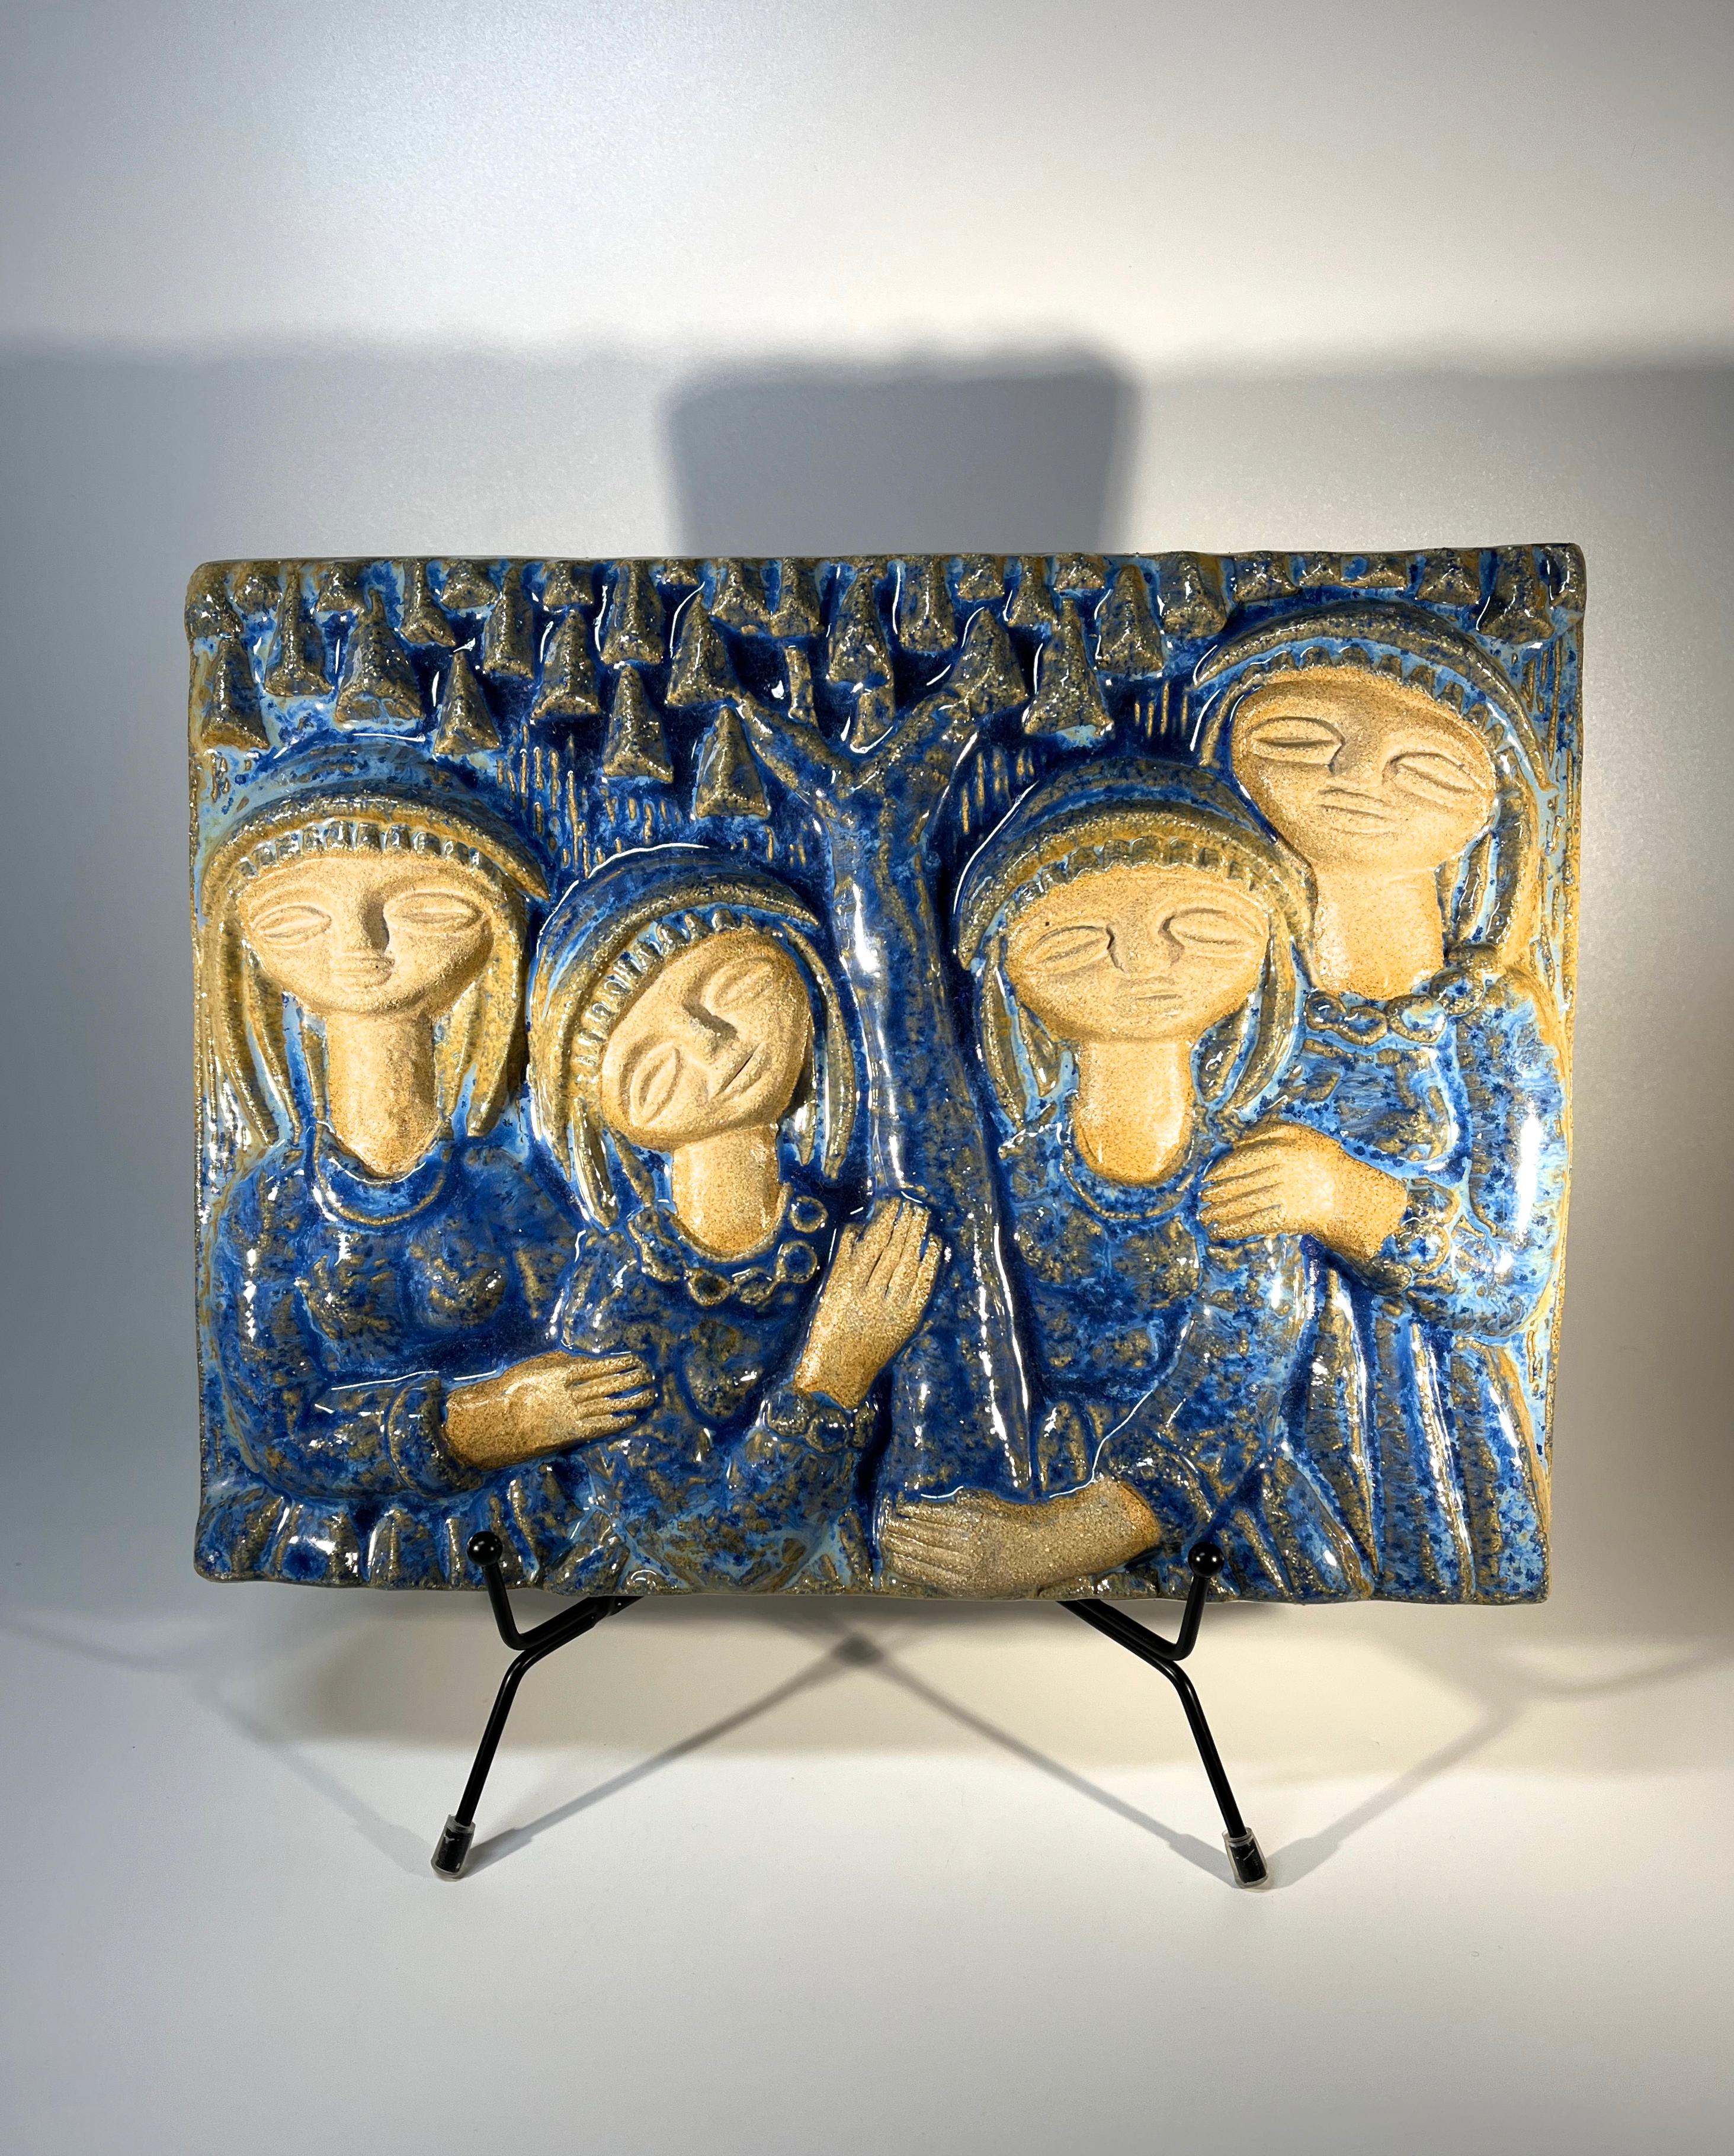 20th Century Blue Ladies By Marianne Starck For Michael Andersen. Danish Wall Plaque For Sale